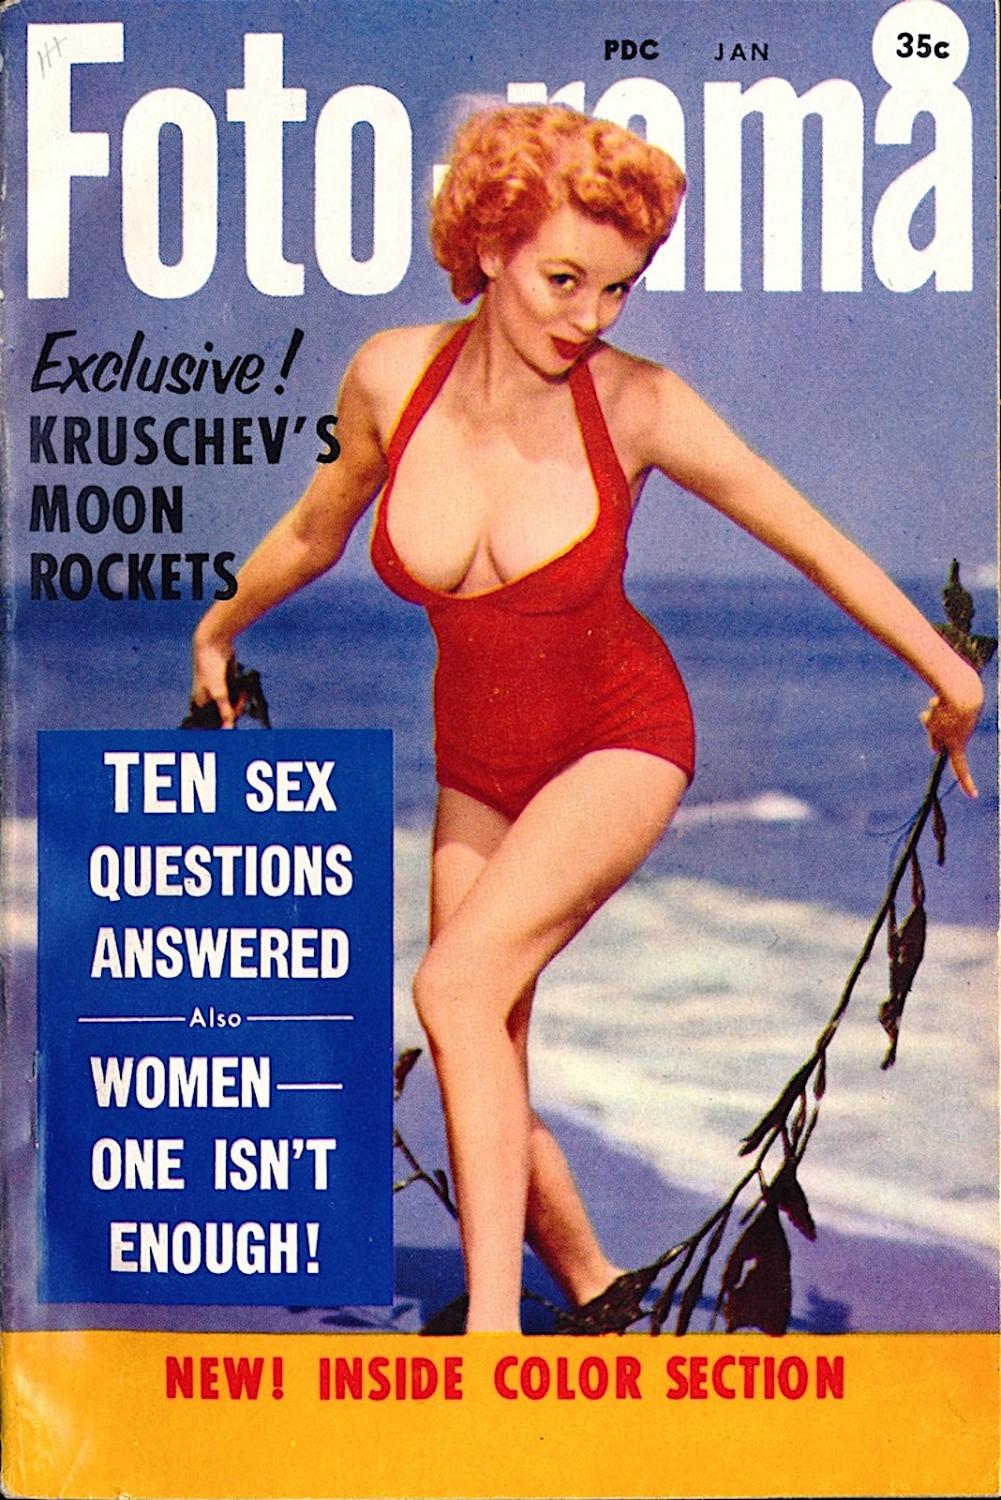 Foto-rama The Photo Magazine of Headline Features (vintage digest pin-up magazine) by Fass, Myron (ed.) Very Good (1958) Well-Stacked Books pic